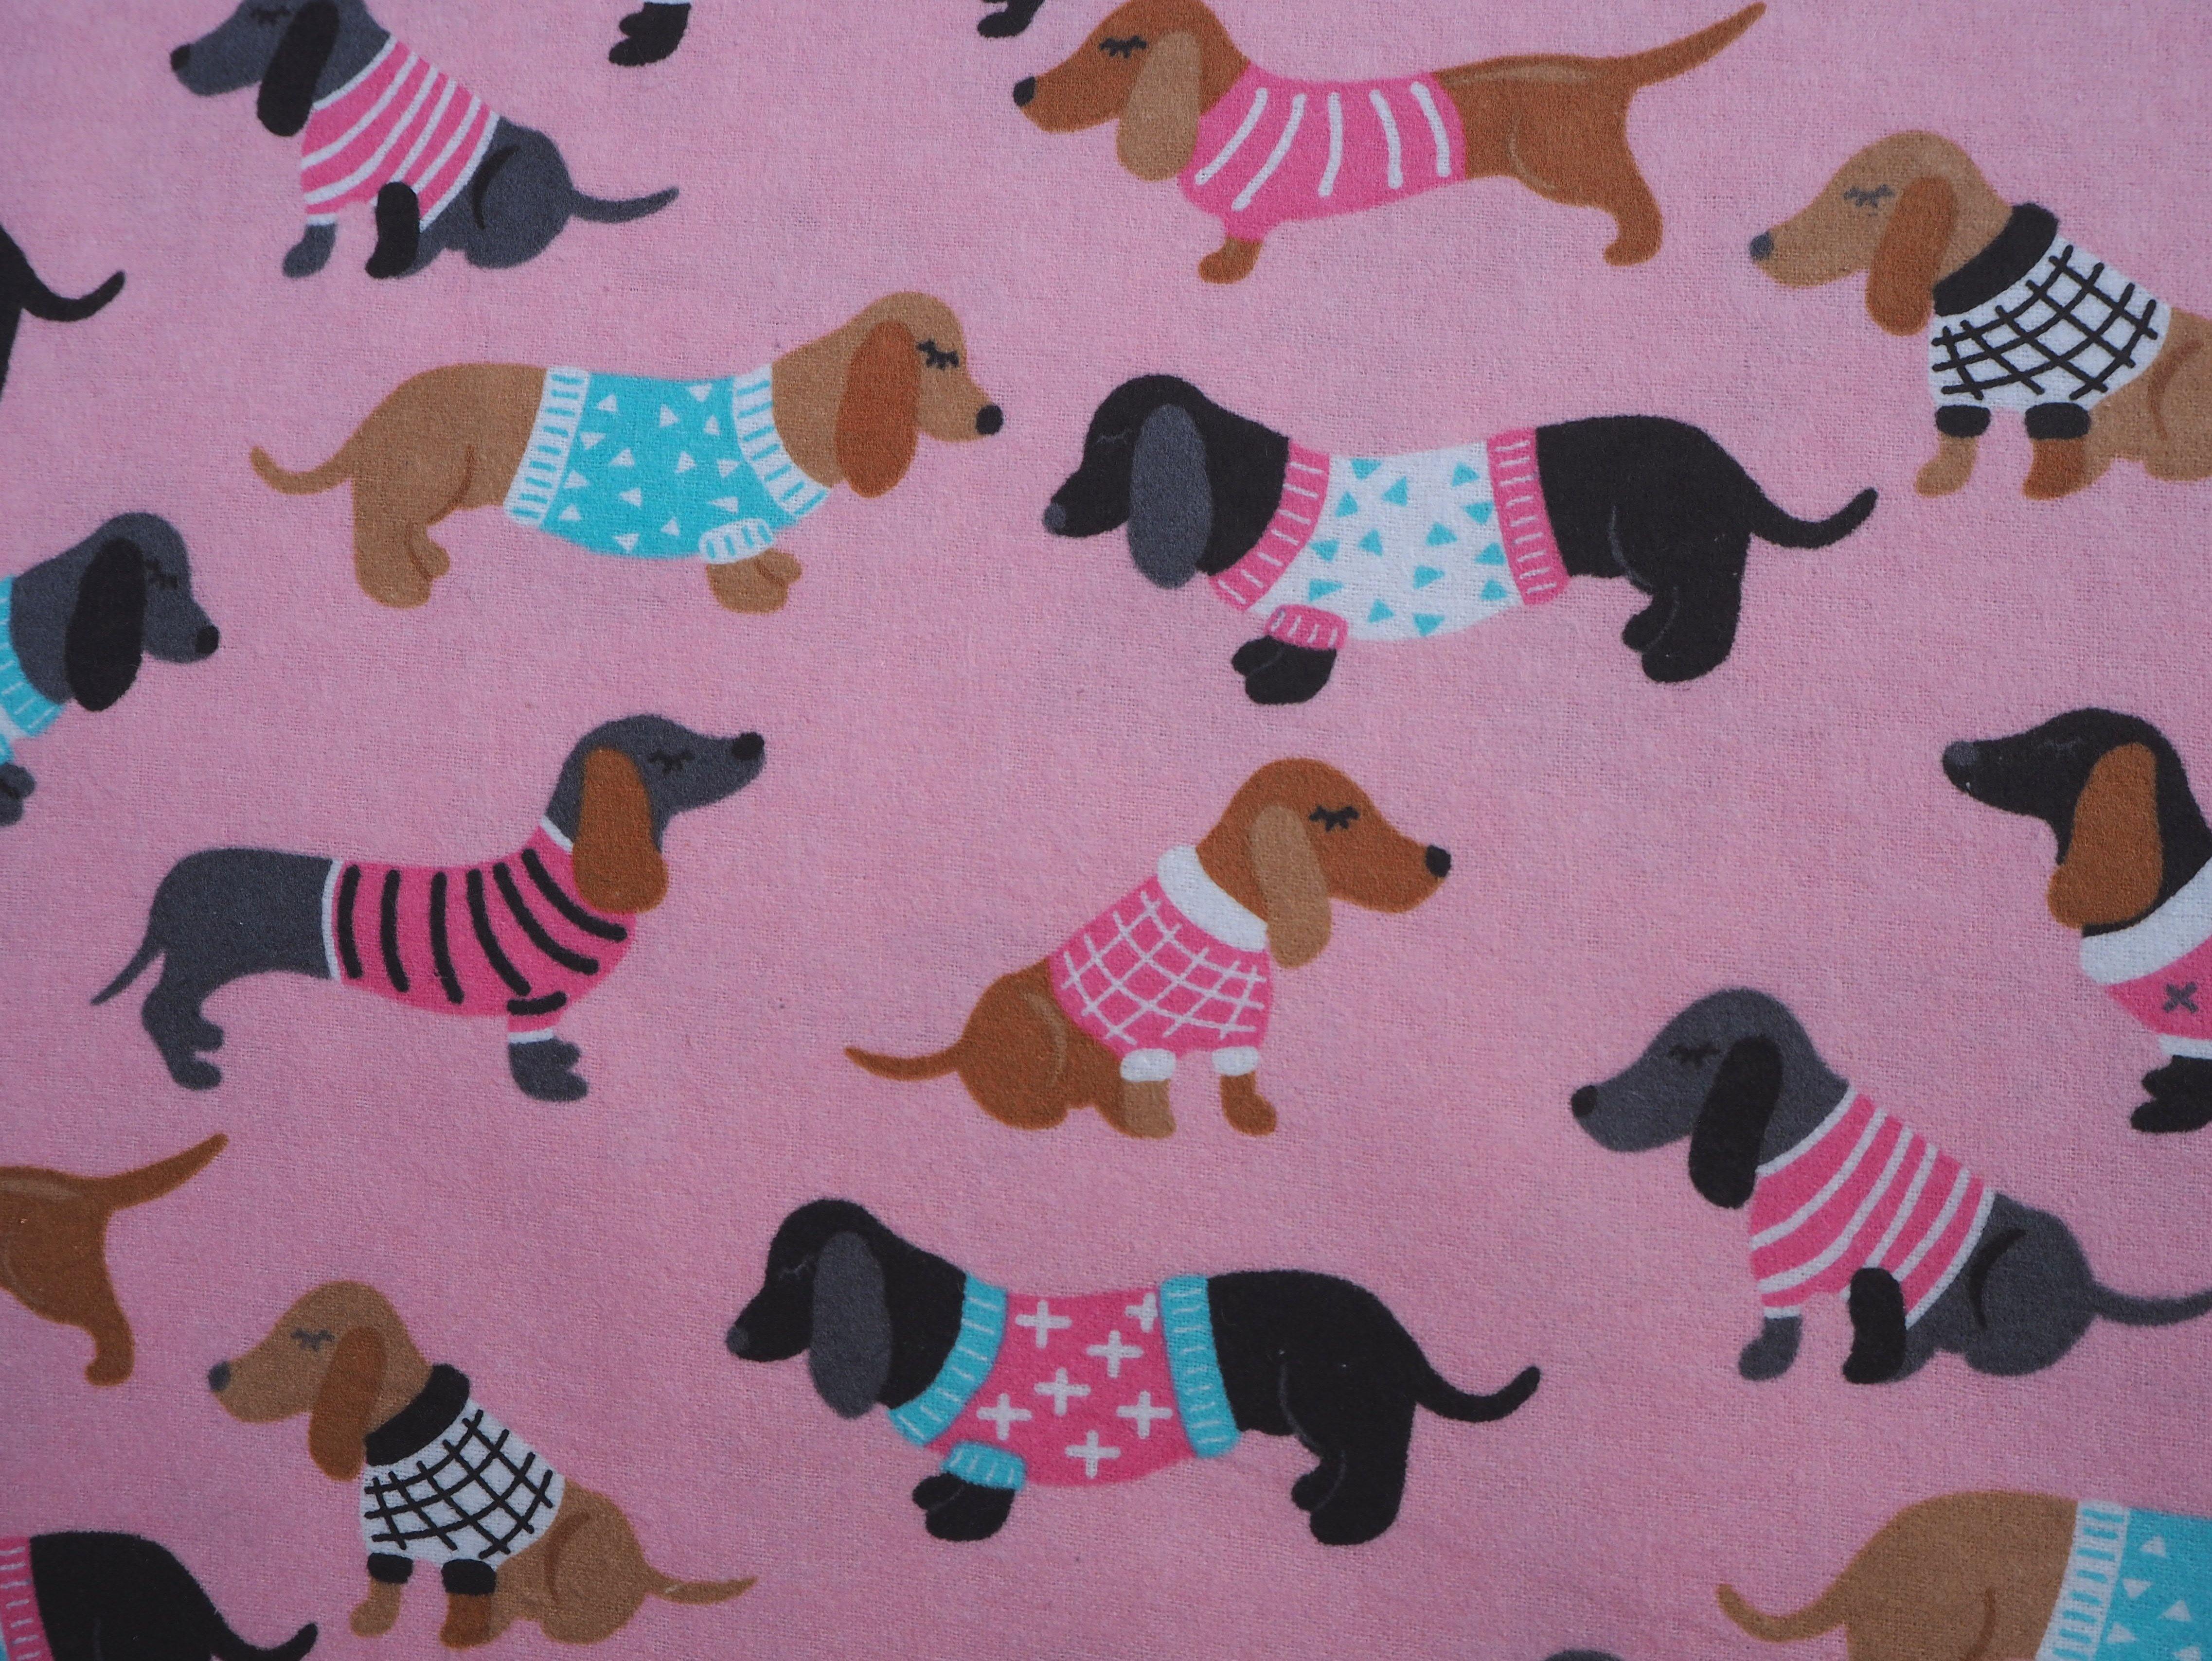 Dogs in Cute Jackets on soft pink flannelette 100% cotton fabric